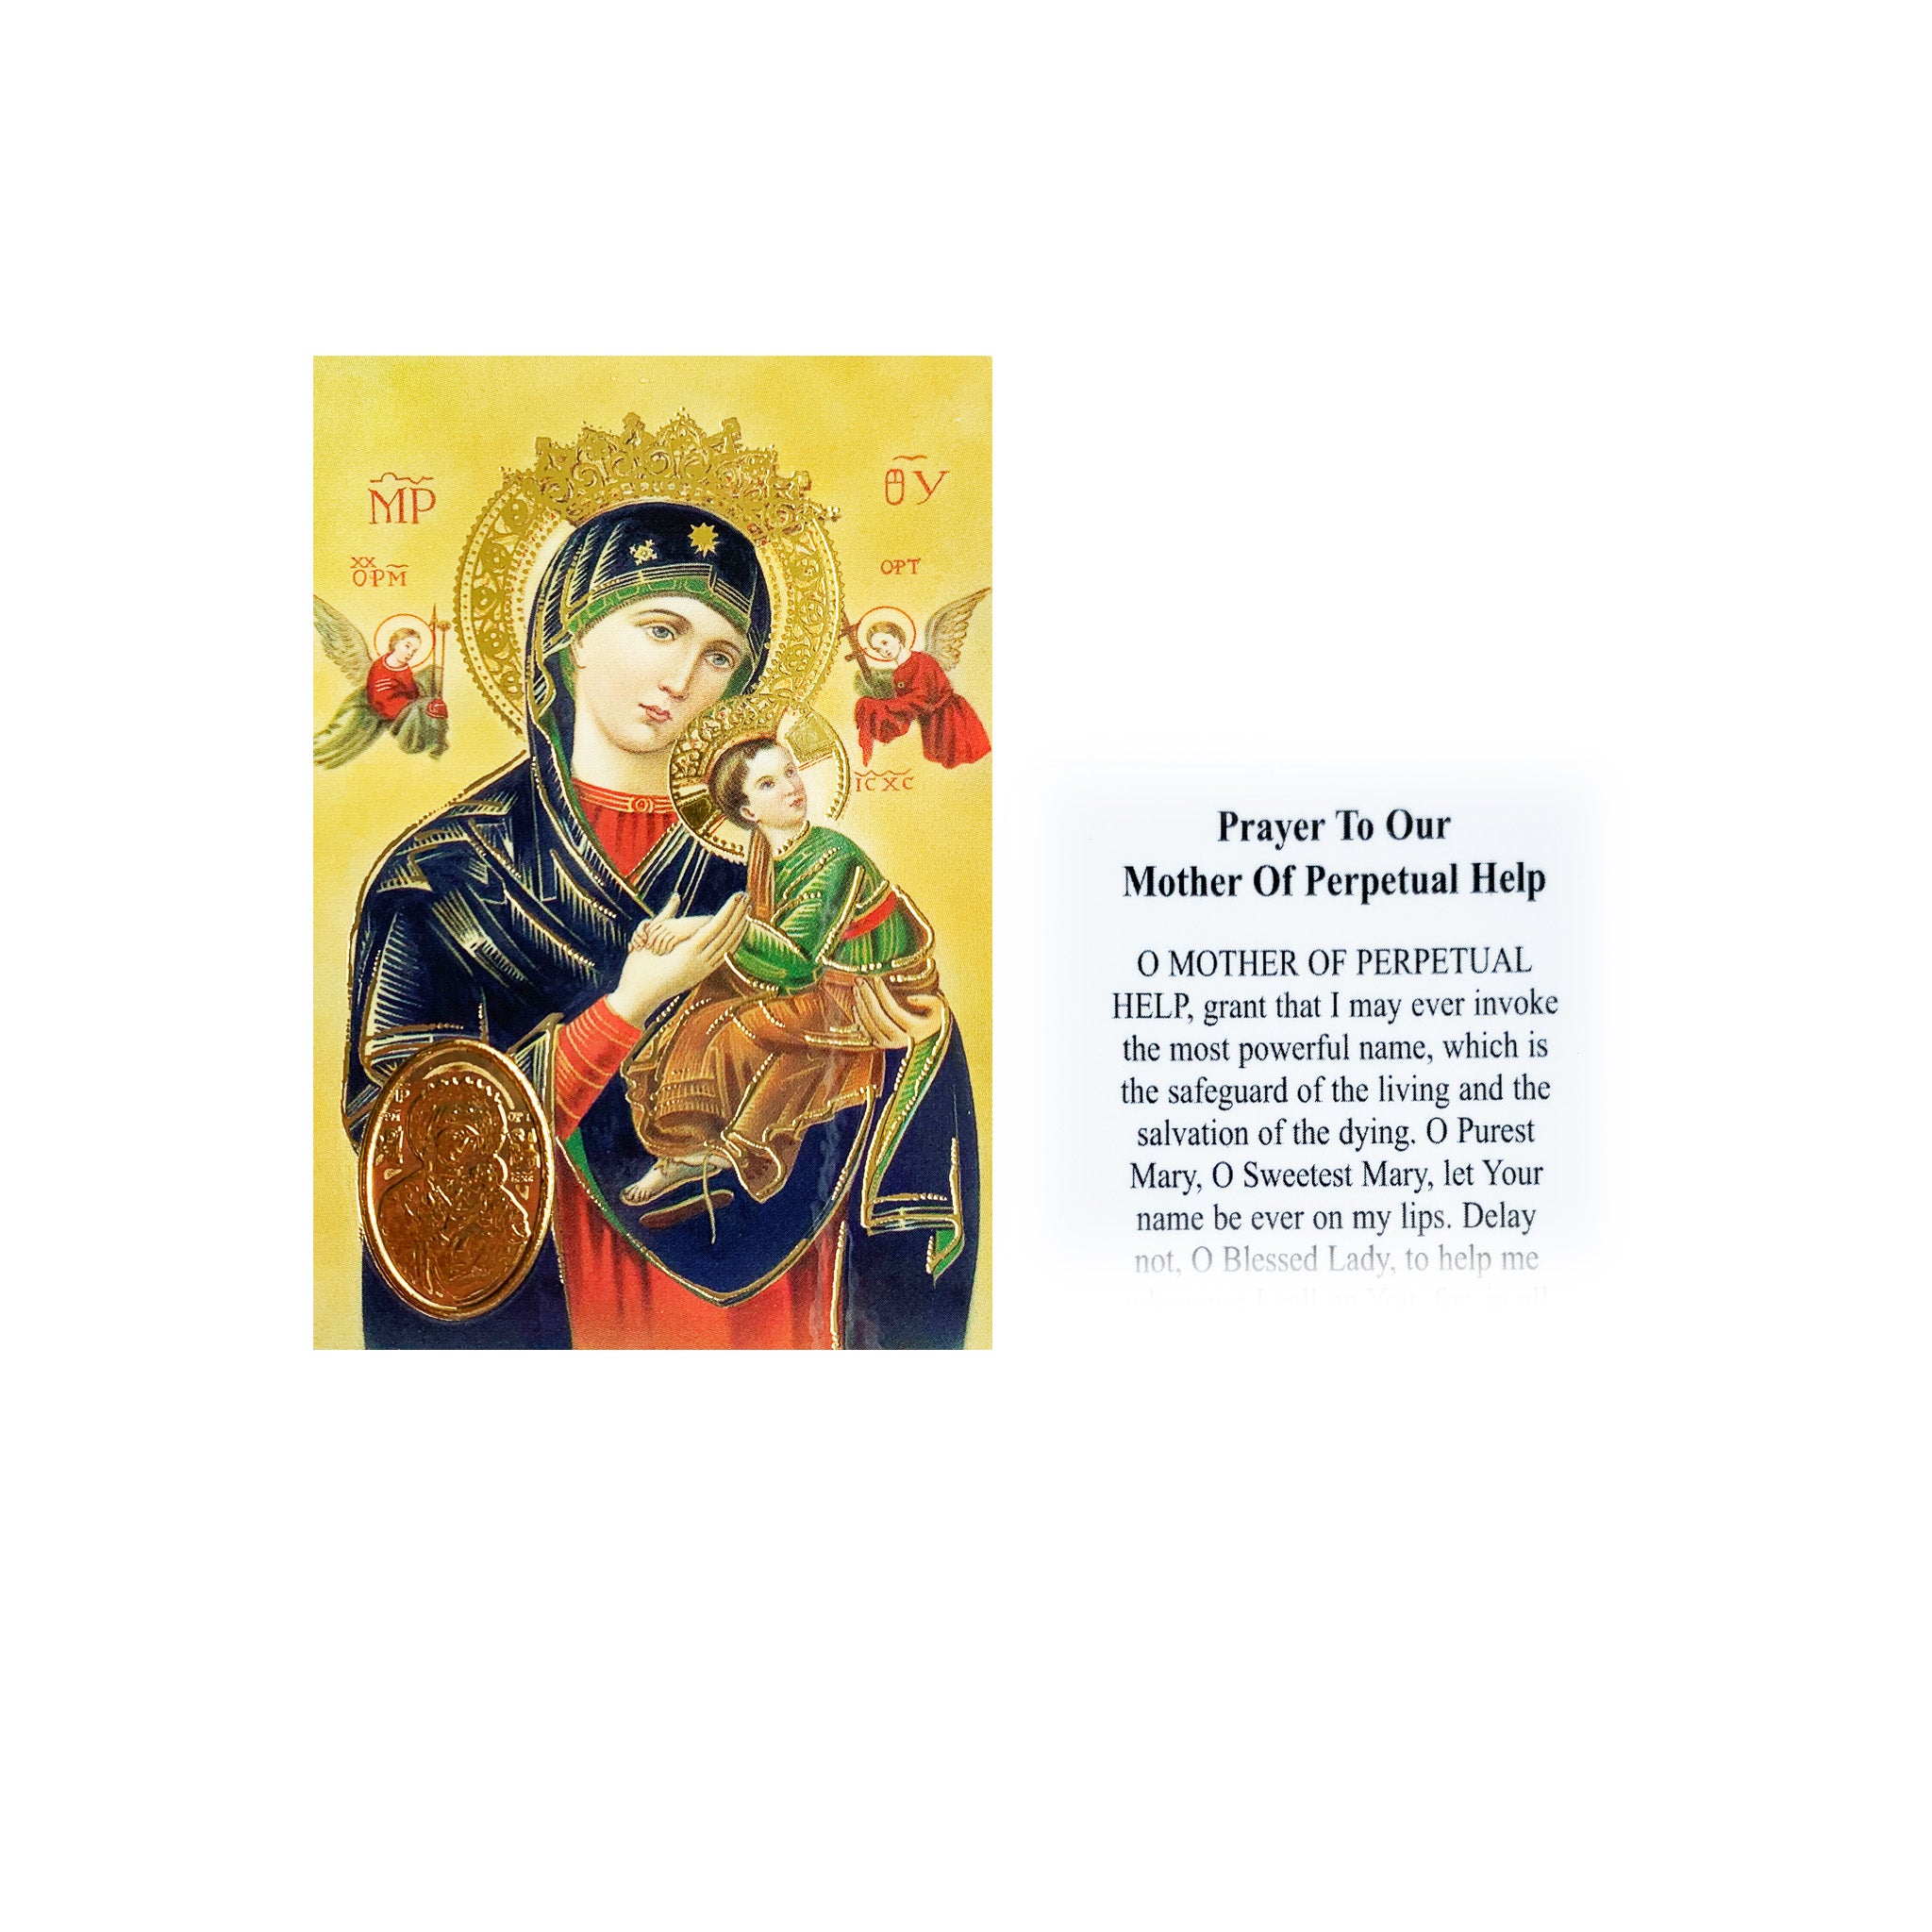 PRAYER CARD OUR MOTHER OF PERPETUAL HELP